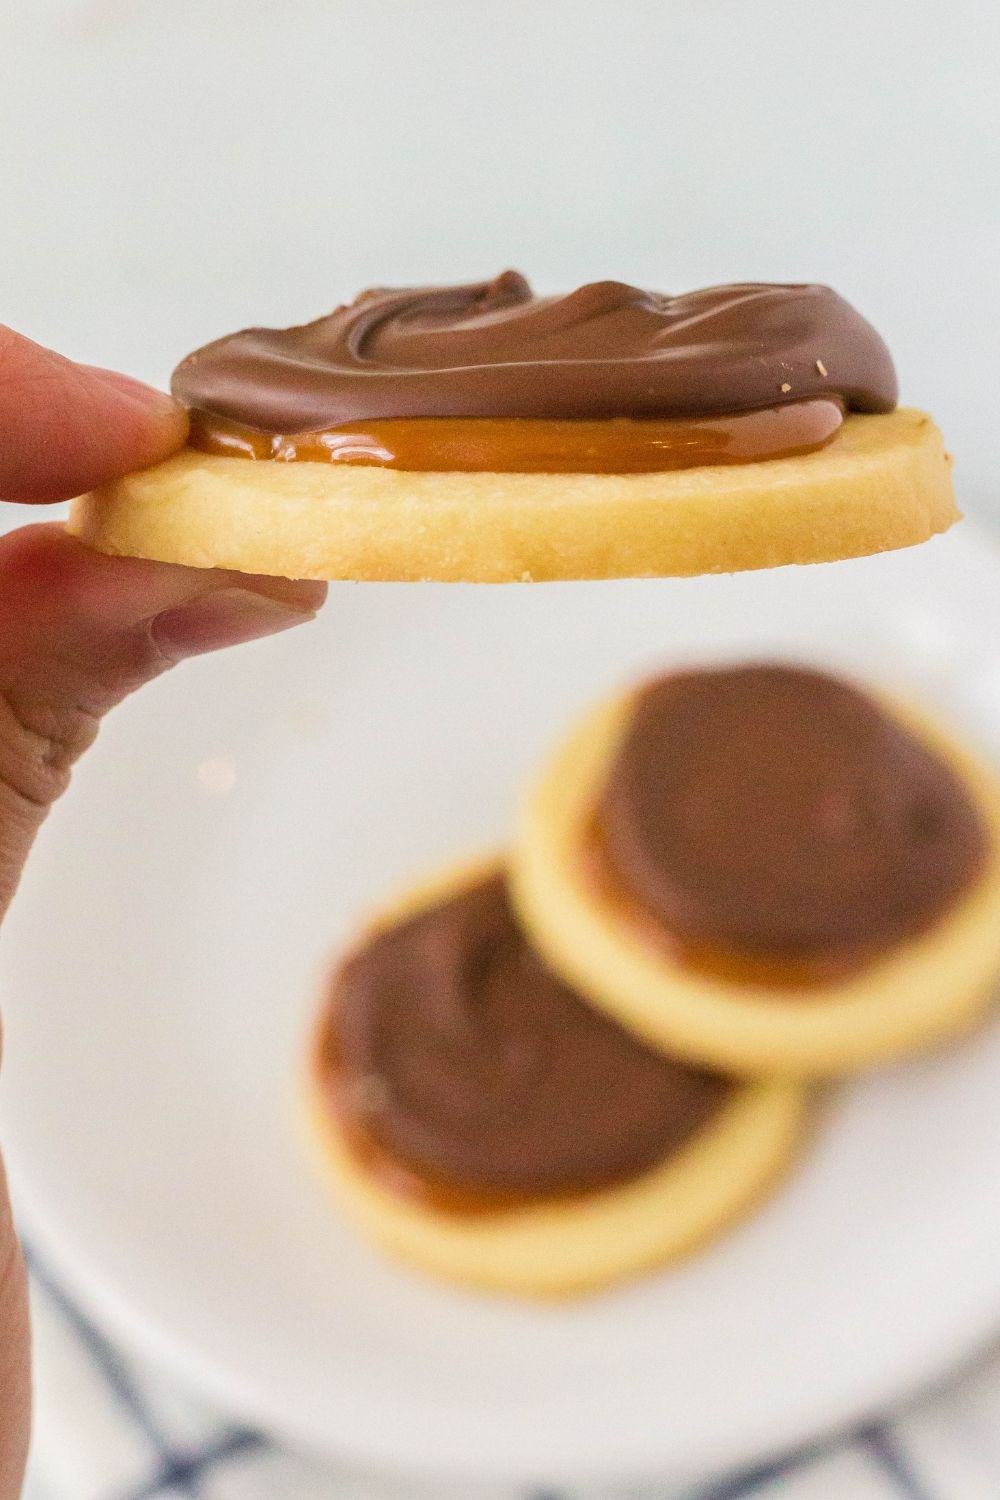 A woman's hand holds a Twix cookie, showing the side view of the cookie, while a plate of cookies rests below.